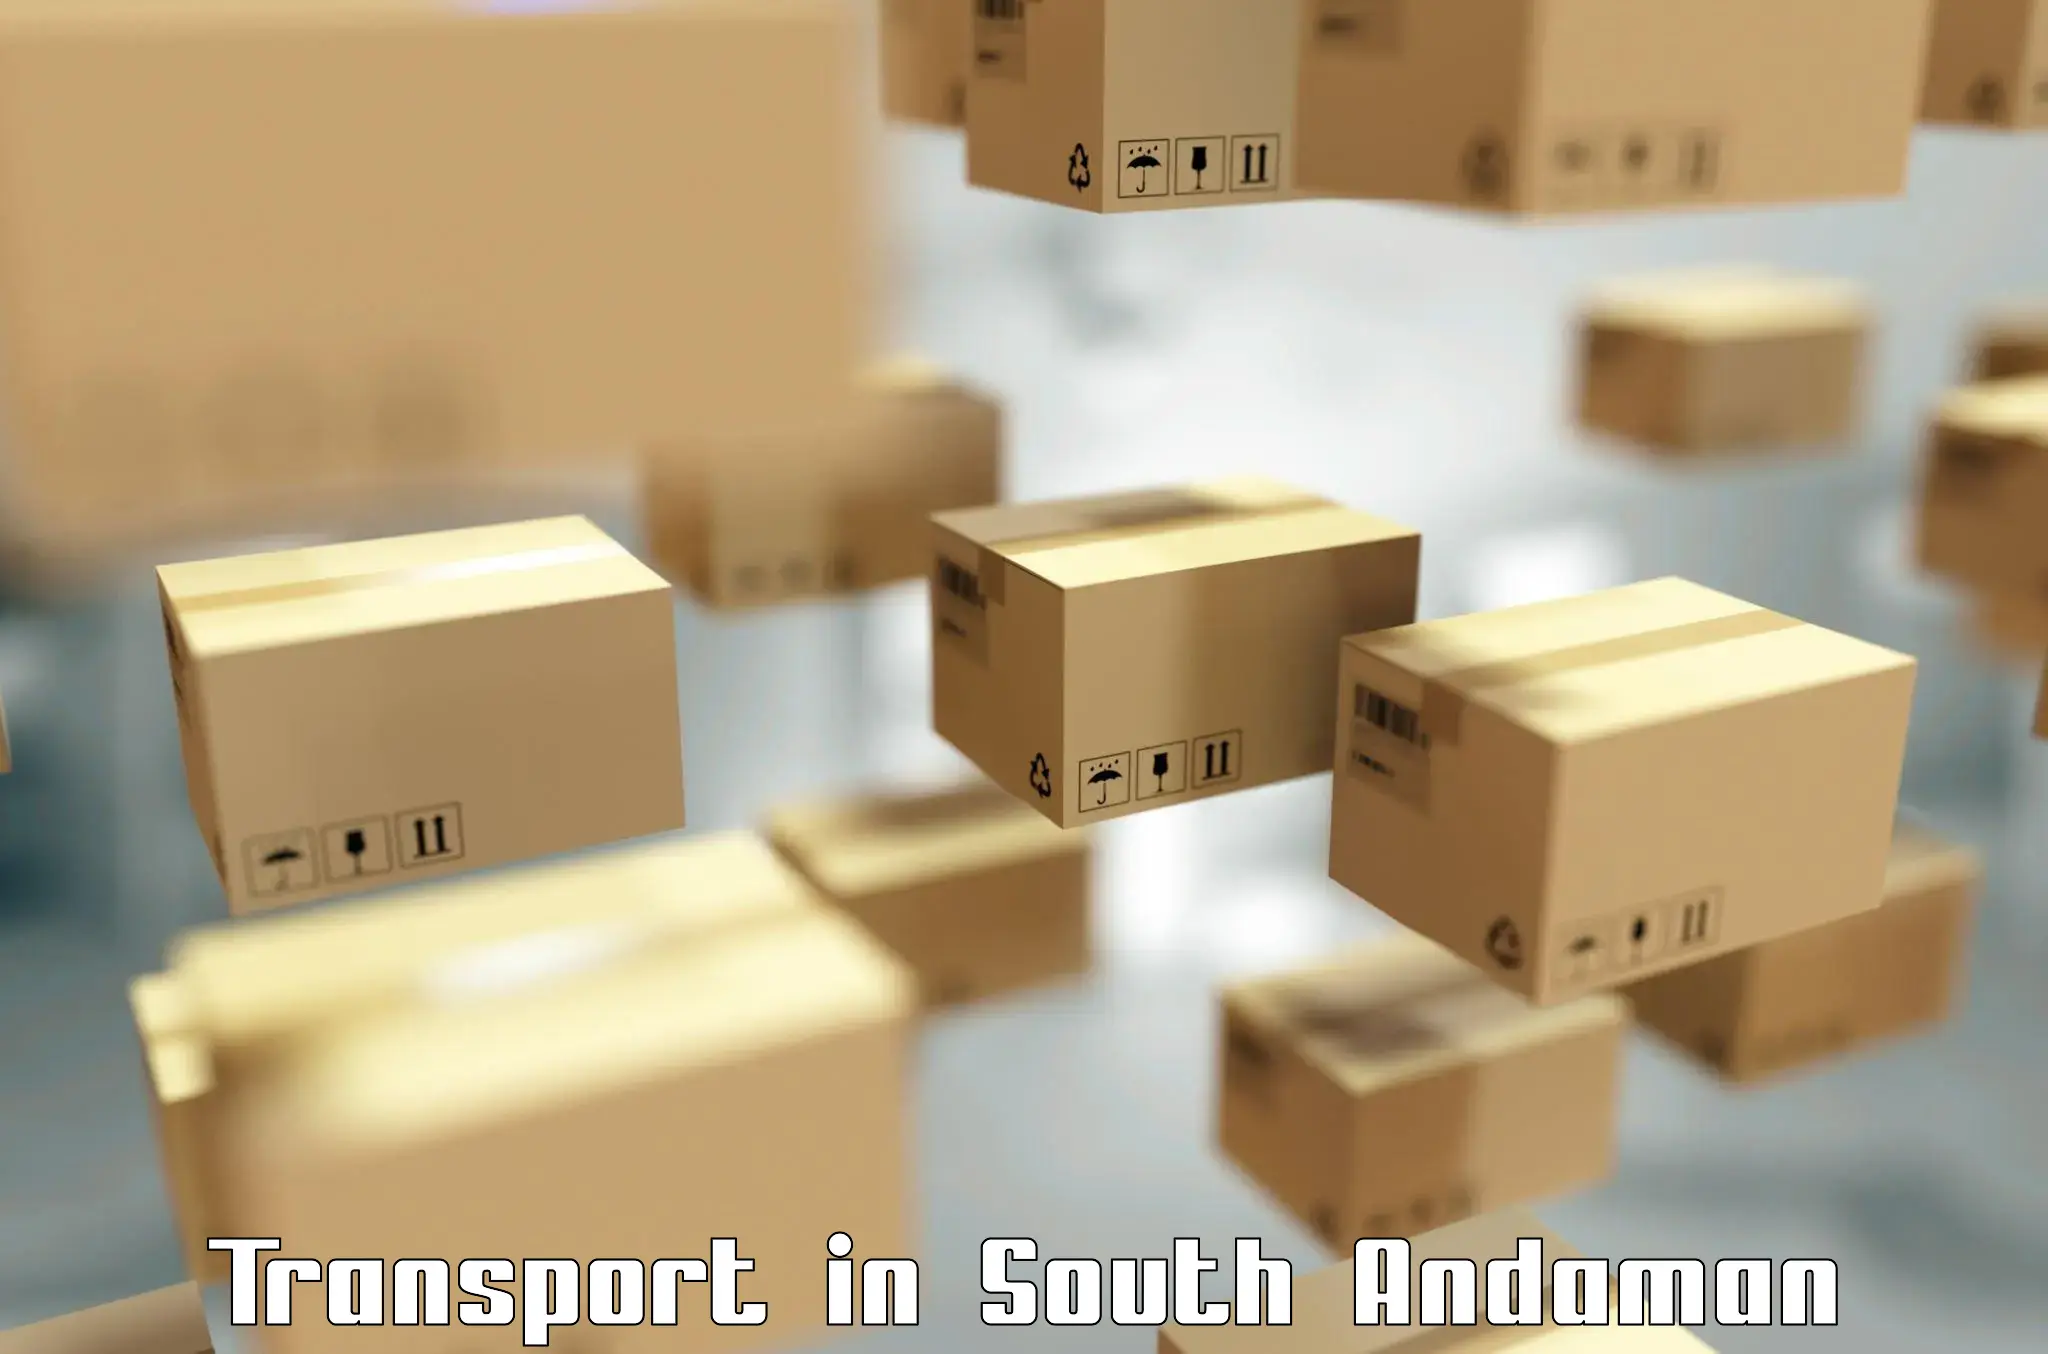 Daily transport service in South Andaman